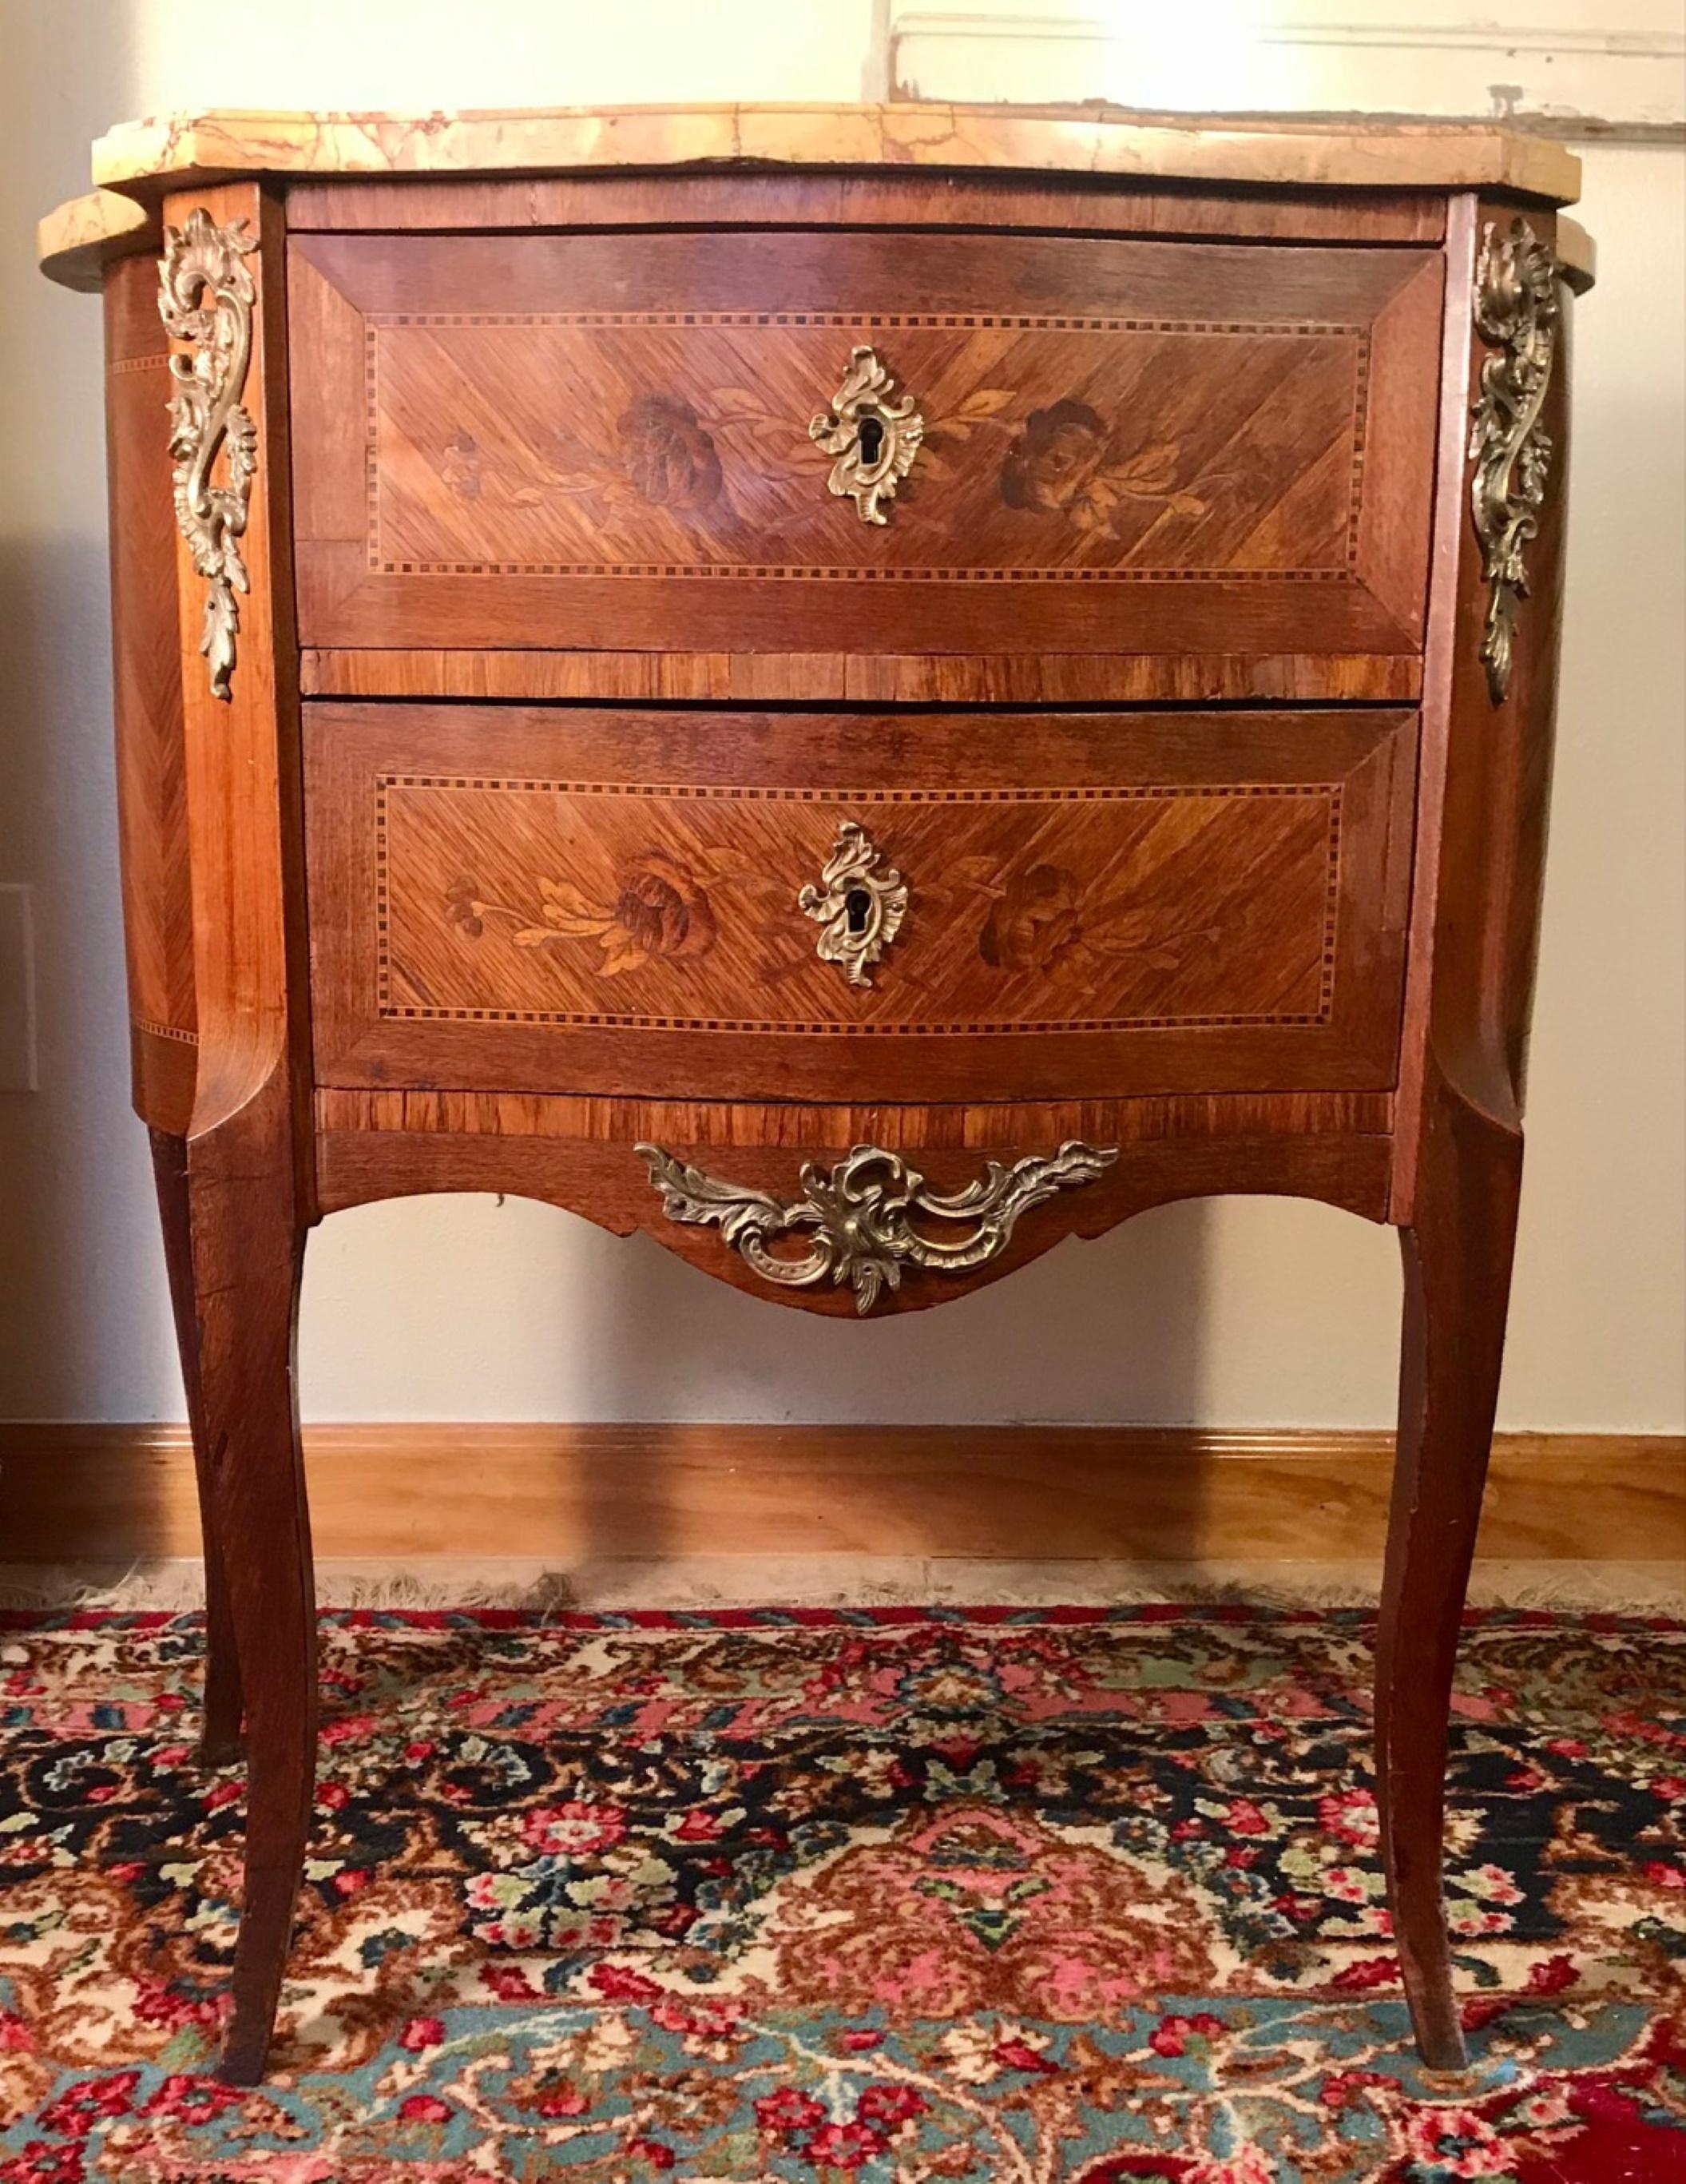 19th Century Louis XVI Style Marquetry 2-drawer Siena Marble Commode 

This Louis XVI style commode is beautifully veneered and decorated with intricate marquetry work on 3 sides. The 2-drawer body is set on slender and graceful cabriole legs.